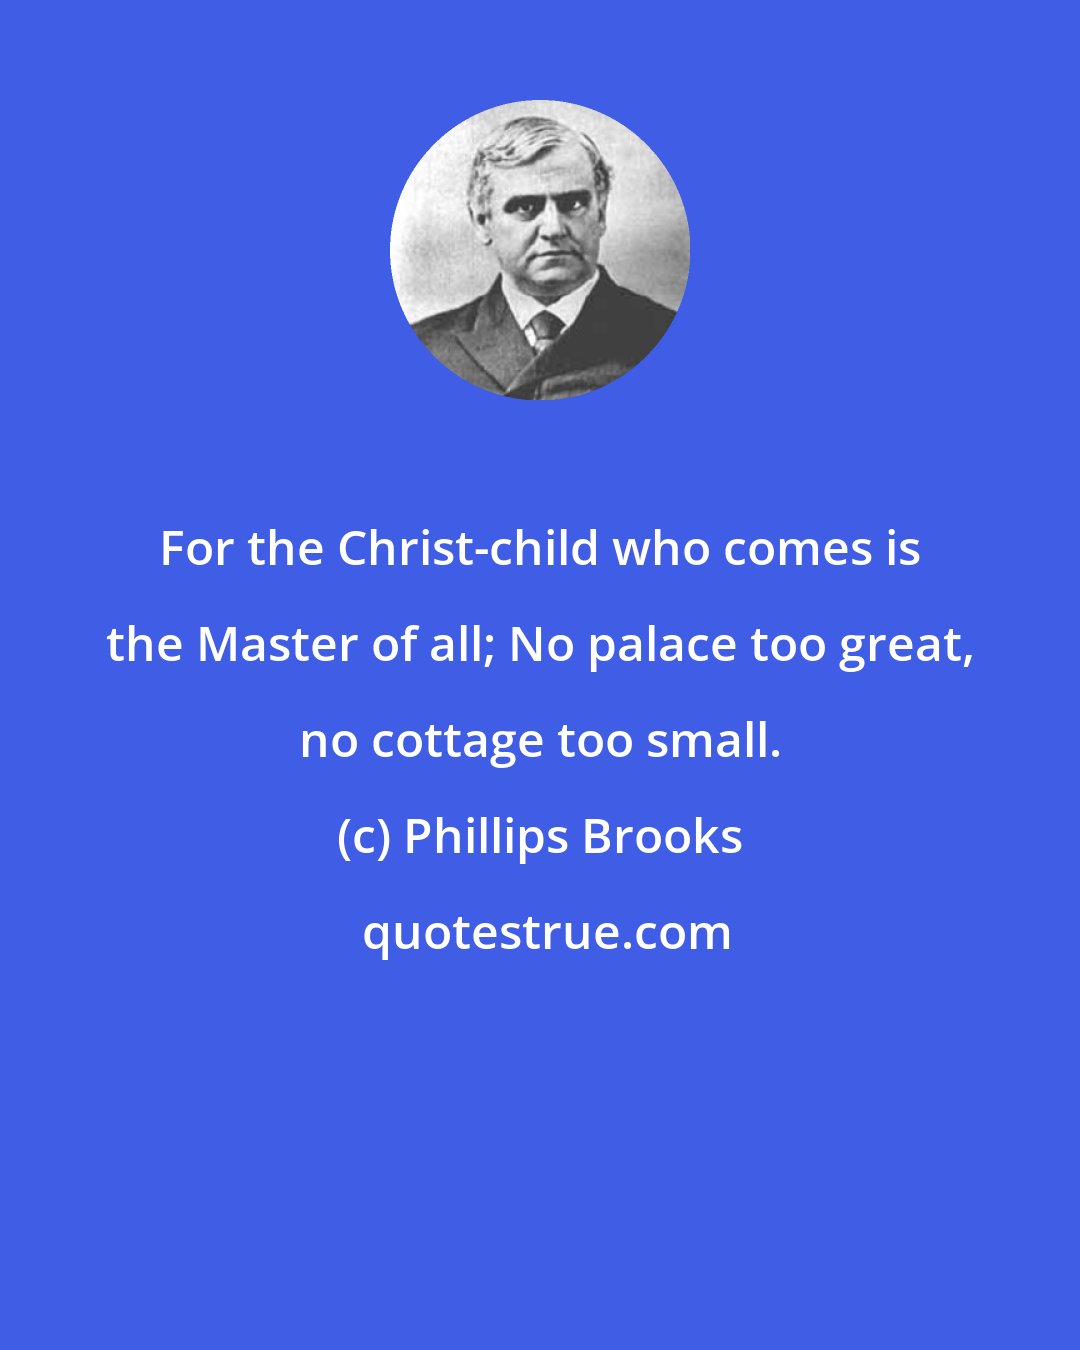 Phillips Brooks: For the Christ-child who comes is the Master of all; No palace too great, no cottage too small.